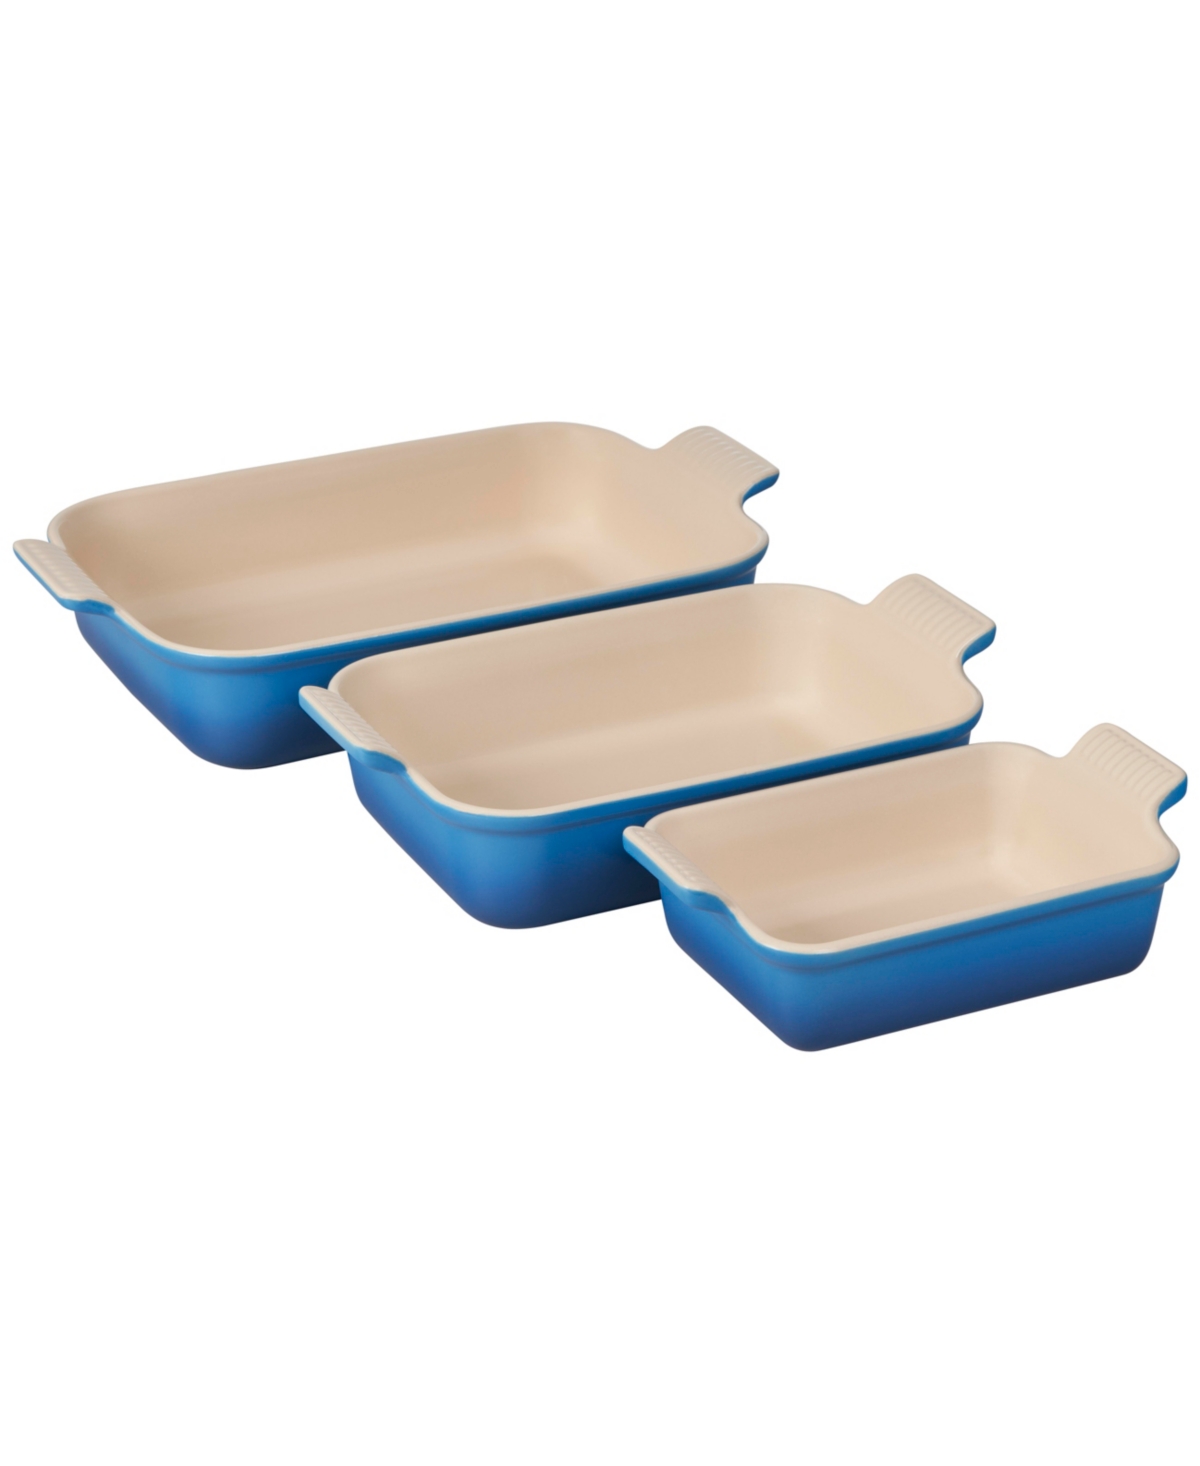 Le Creuset 3-piece Stoneware Heritage Bakers Set In Marseille